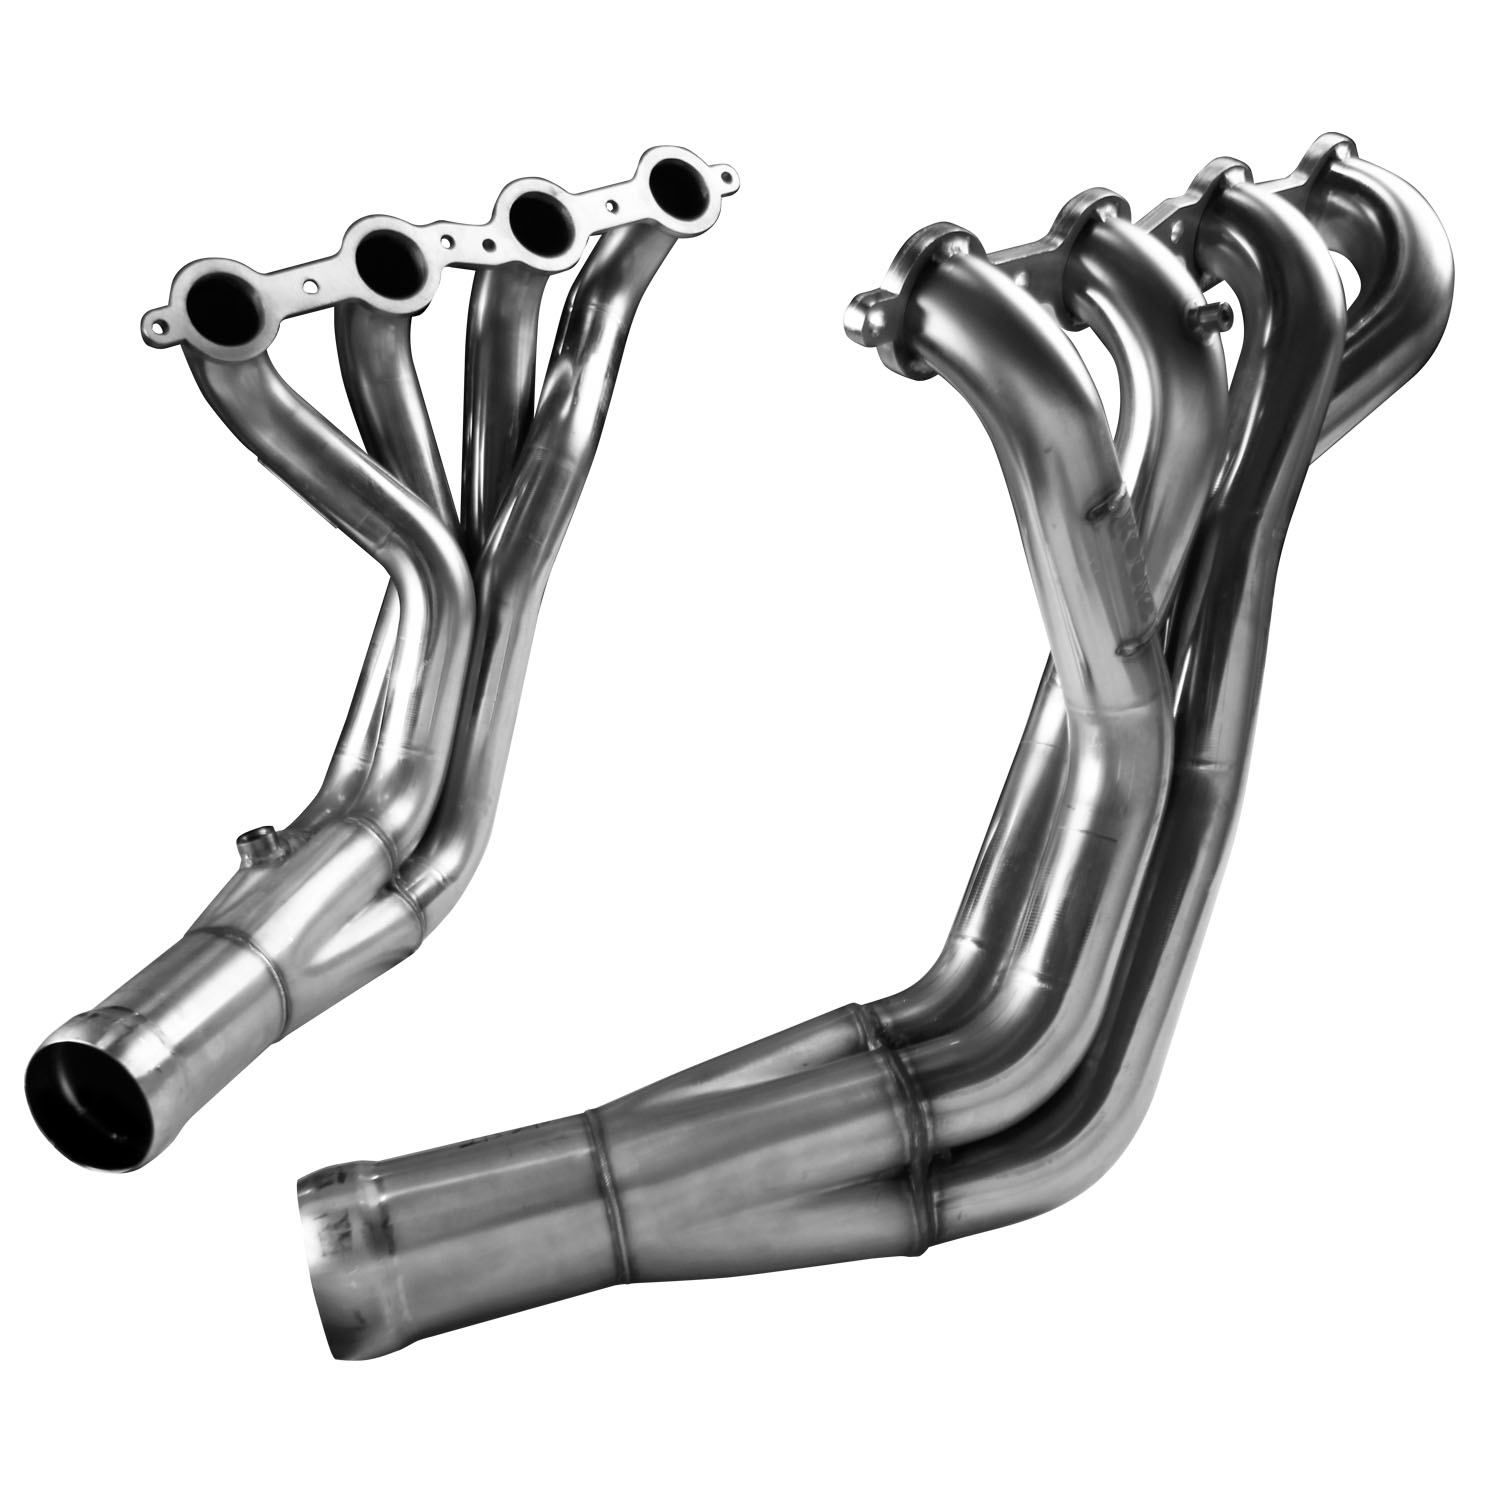 Stainless Steel Headers Race Version-Non Emission 2 x 3" Long Tube 97-04 Corvette C5 LS1/LS6 5.7L O2 Fittings Only w/Merge Colle